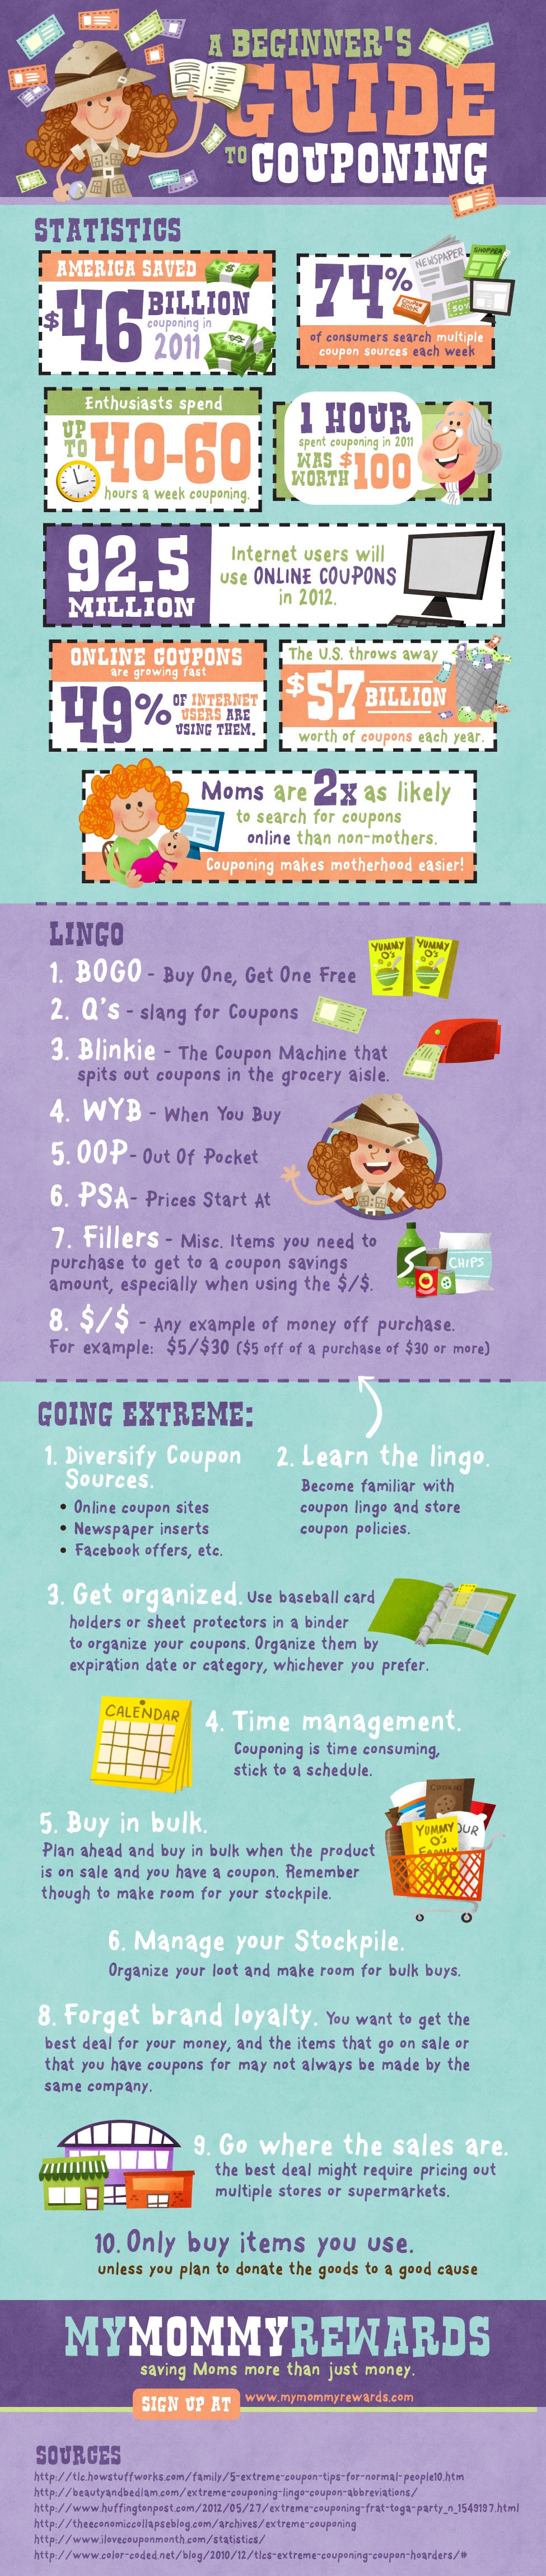 Couponing Guide For Beginners [Infographic]